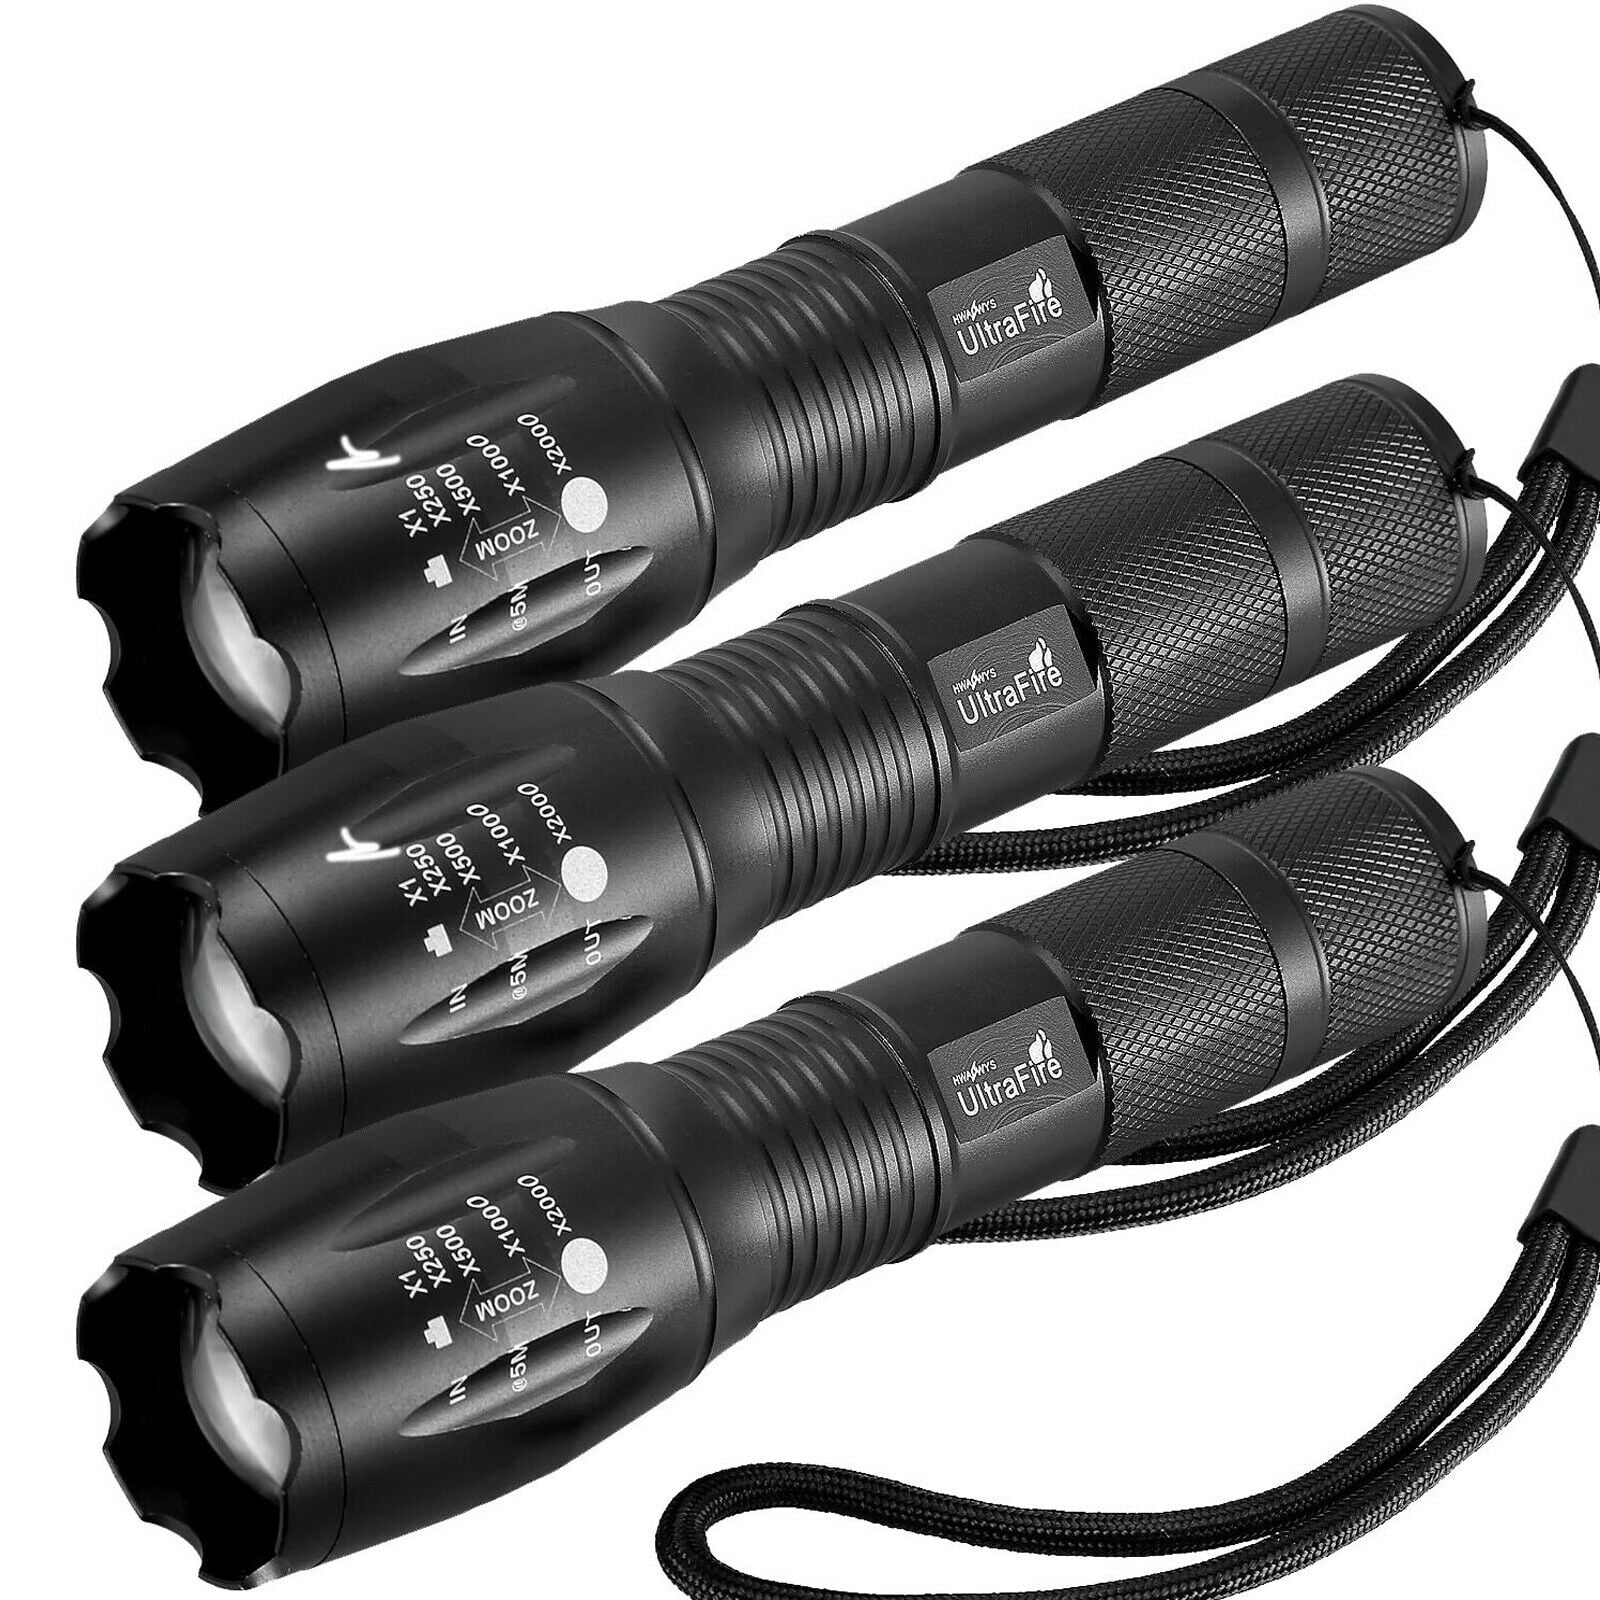 Ultrafire Tactical 50000Lumens T6 LED Mini Flashlight Torch Lamp Light Zoomable 